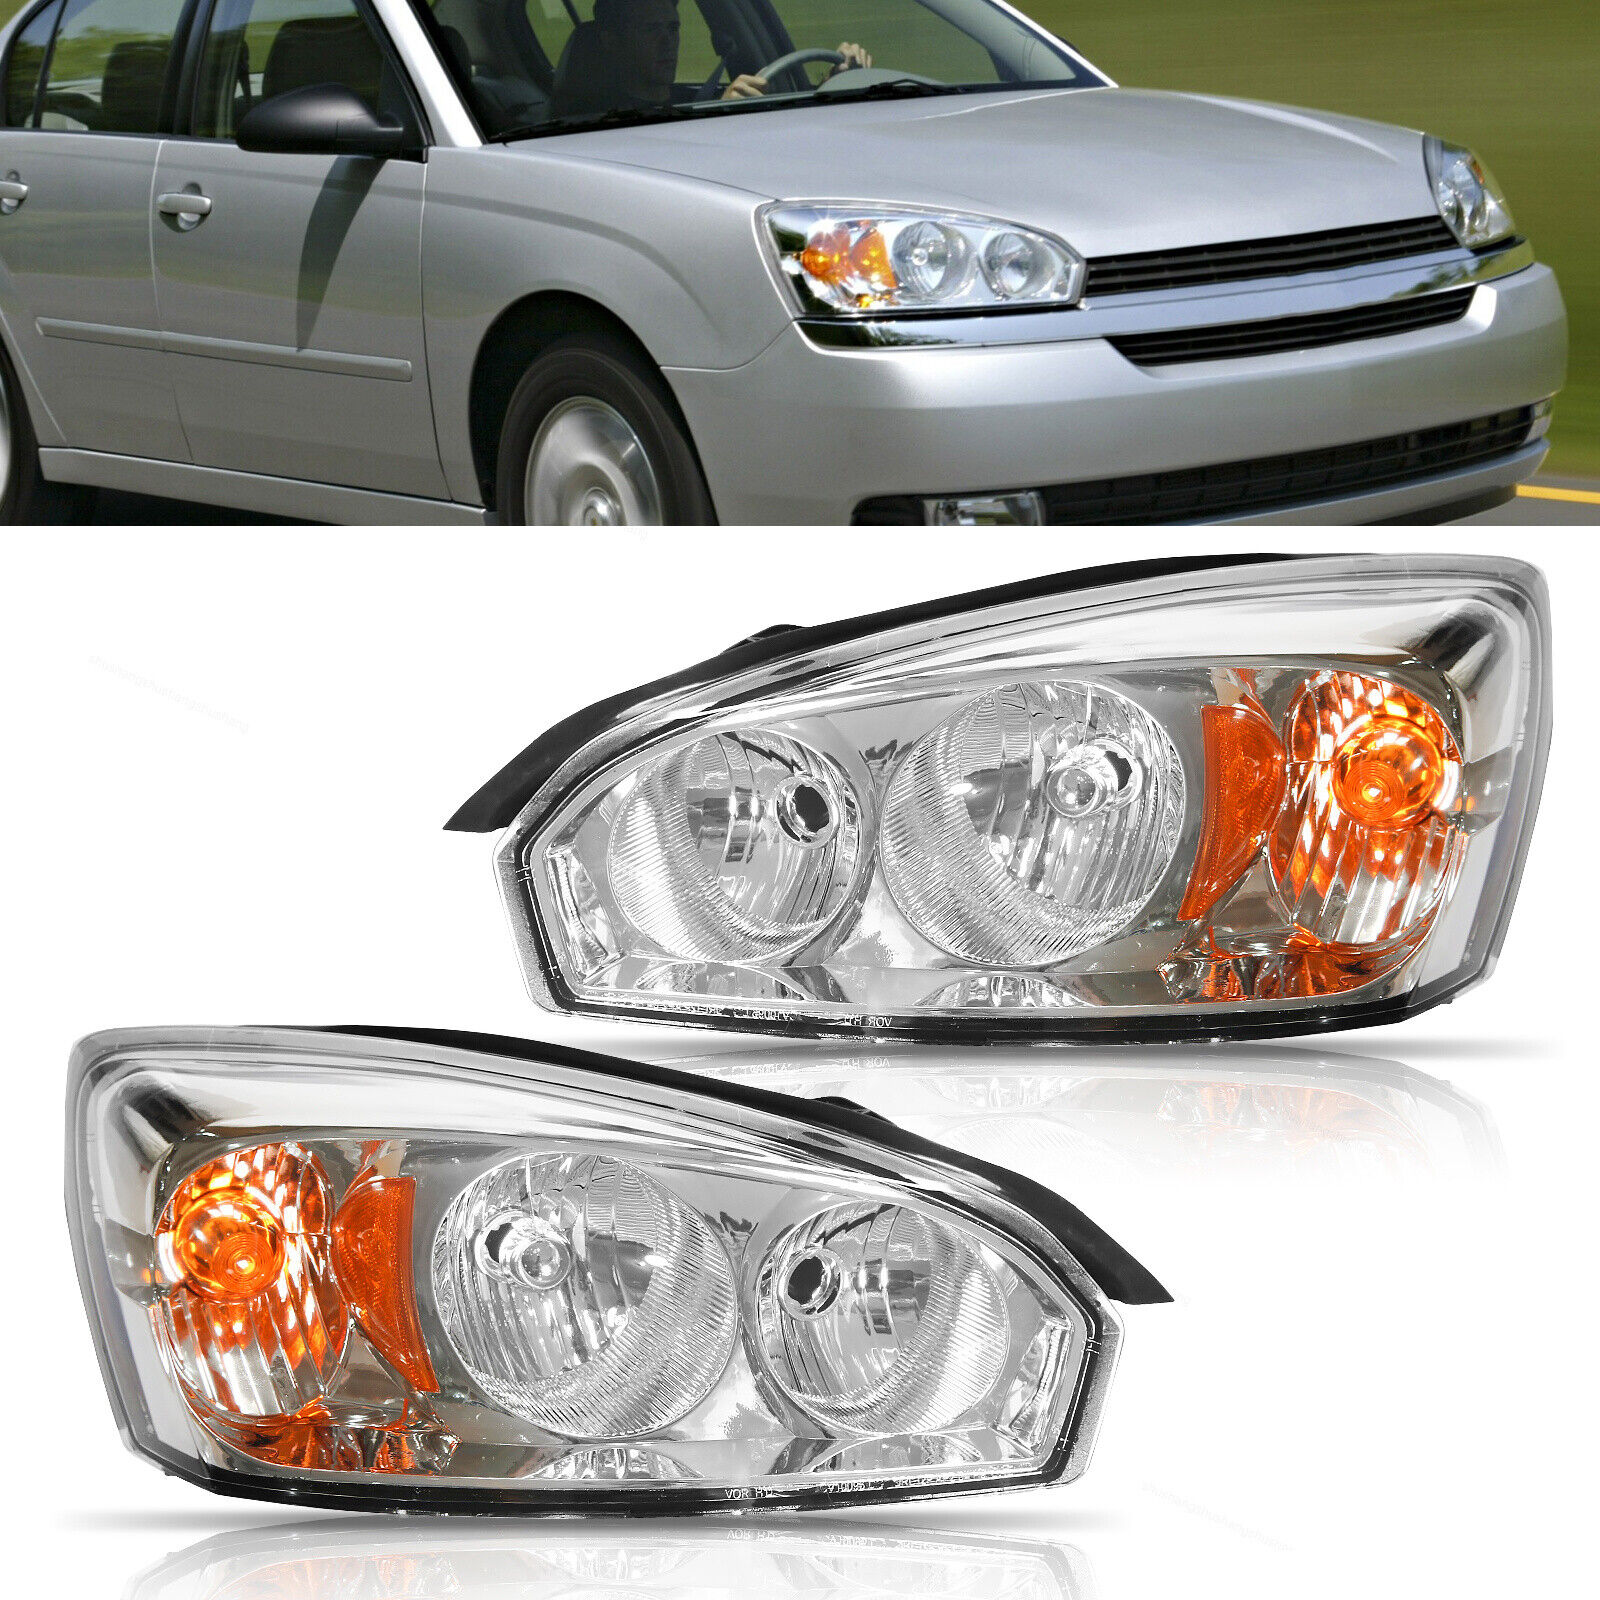 VICTOCAR Headlights Head Lamps Replacement Set Fit for 2004-2008 Chevy Malibu